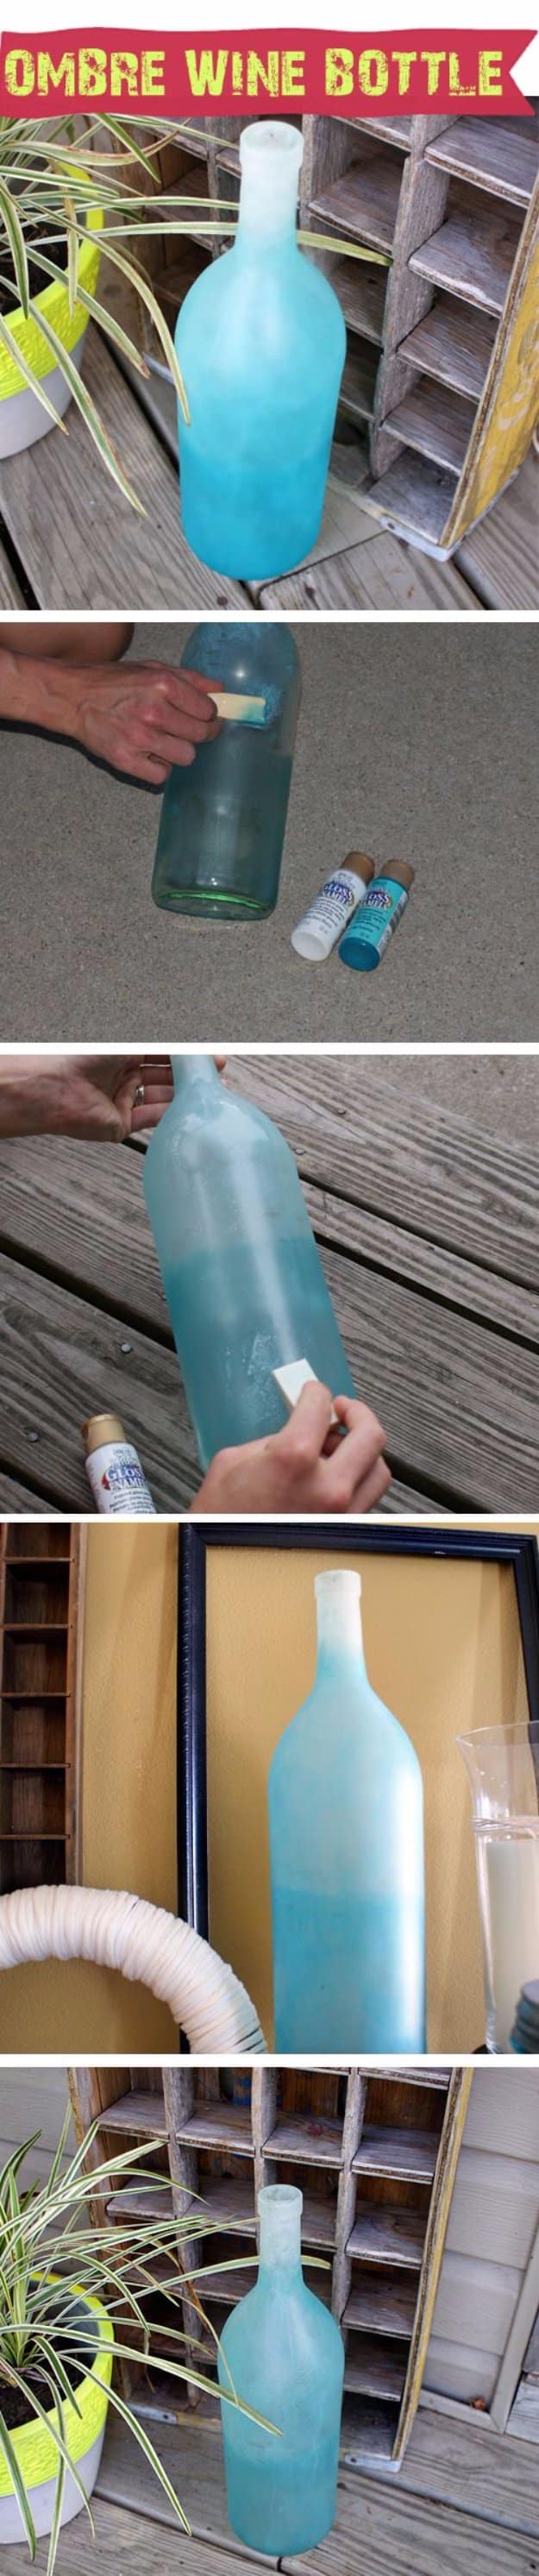 Wine Bottle DIY Crafts - DIY Frosted Ombre Wine Bottle - Projects for Lights, Decoration, Gift Ideas, Wedding, Christmas. Easy Cut Glass Ideas for Home Decor on Pinterest 